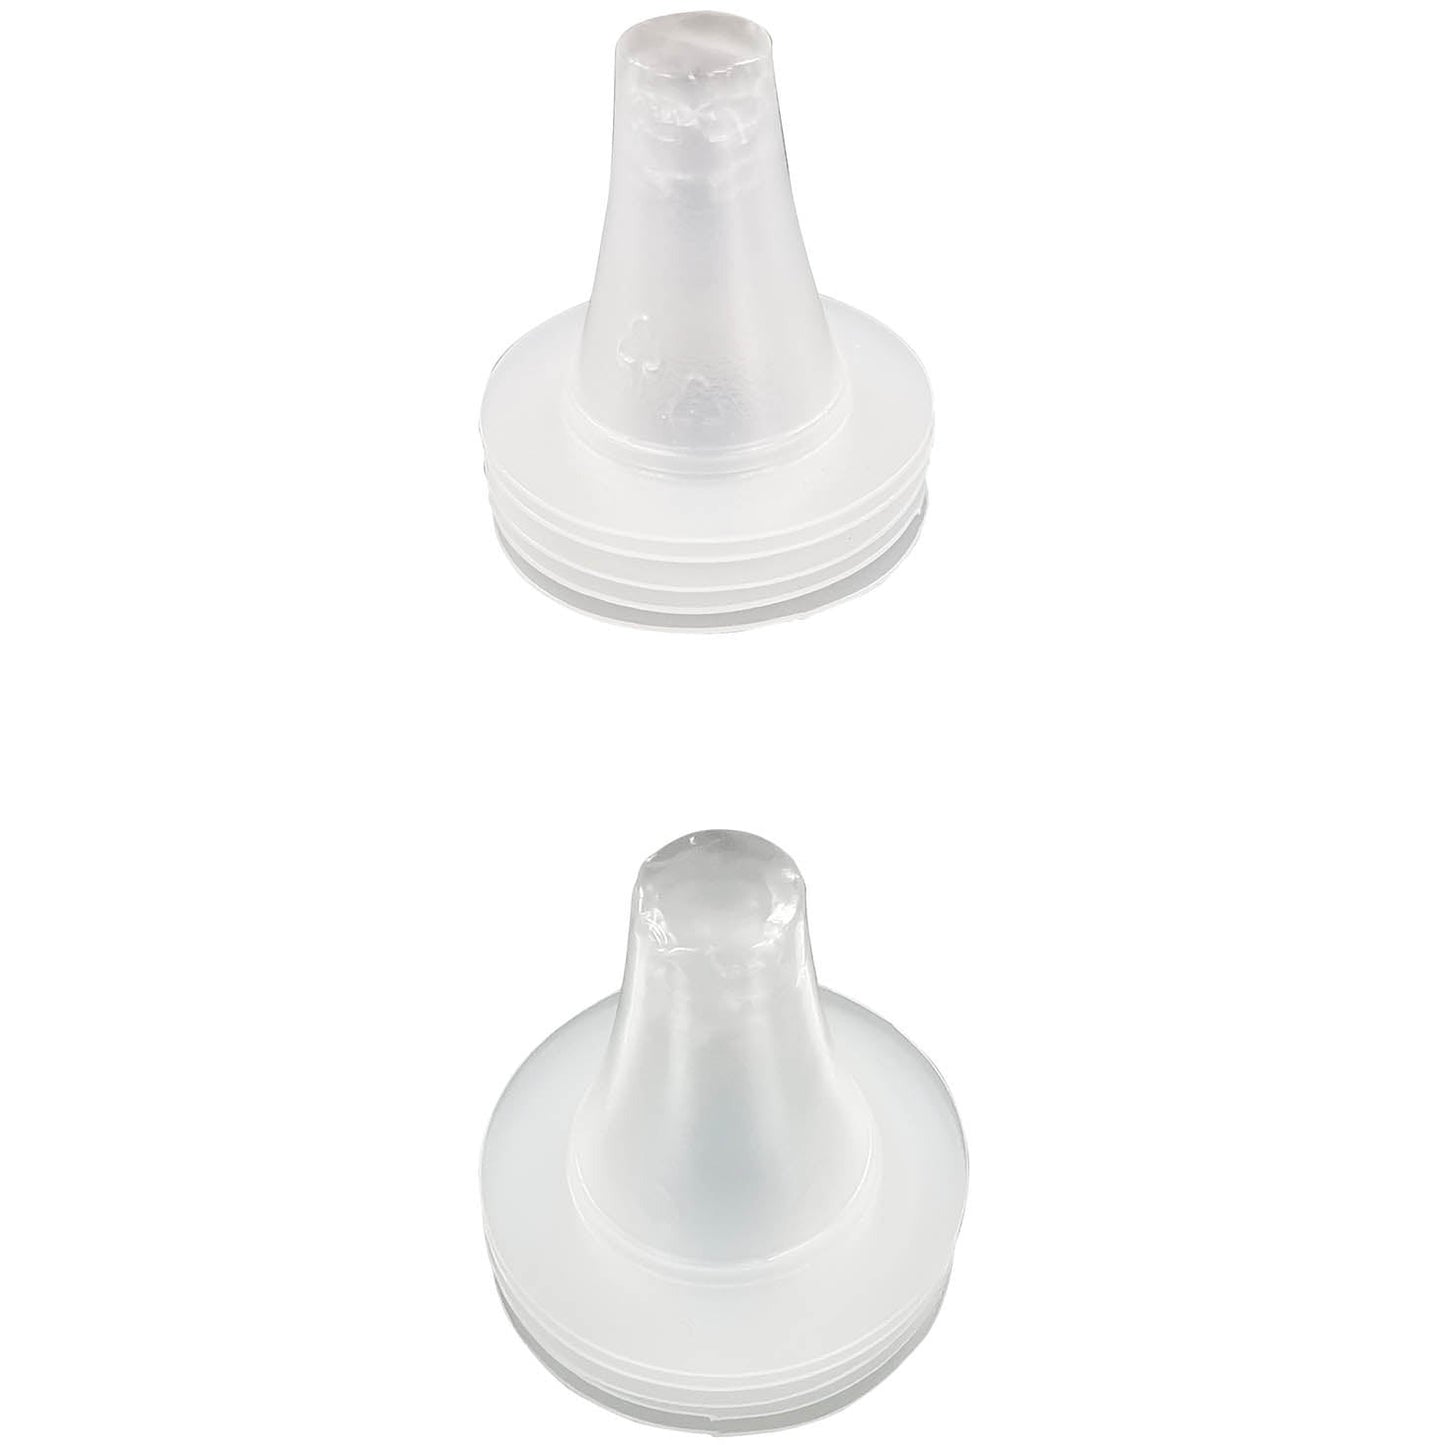 Ear Thermometer Probe Caps - Box Of 40